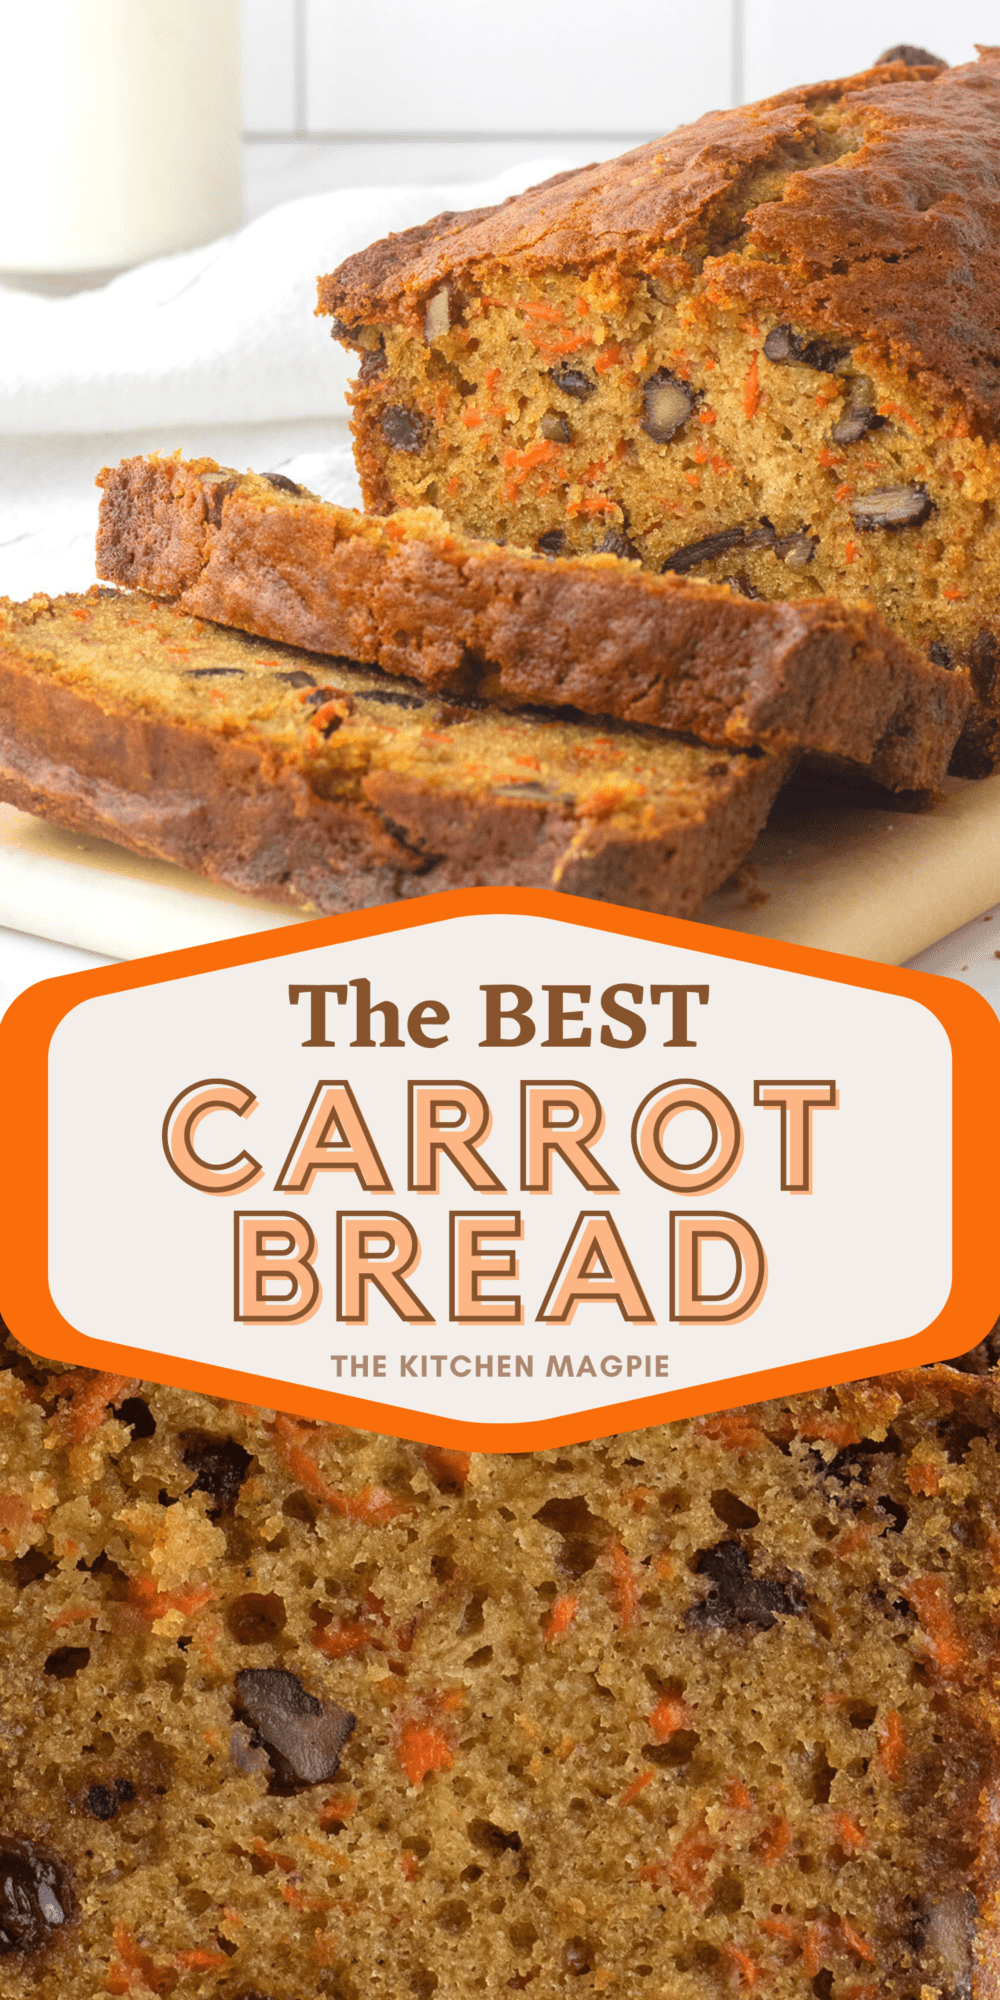 Easy to make and bursting with flavor this carrot bread is loaded with spices, raisins and walnuts!